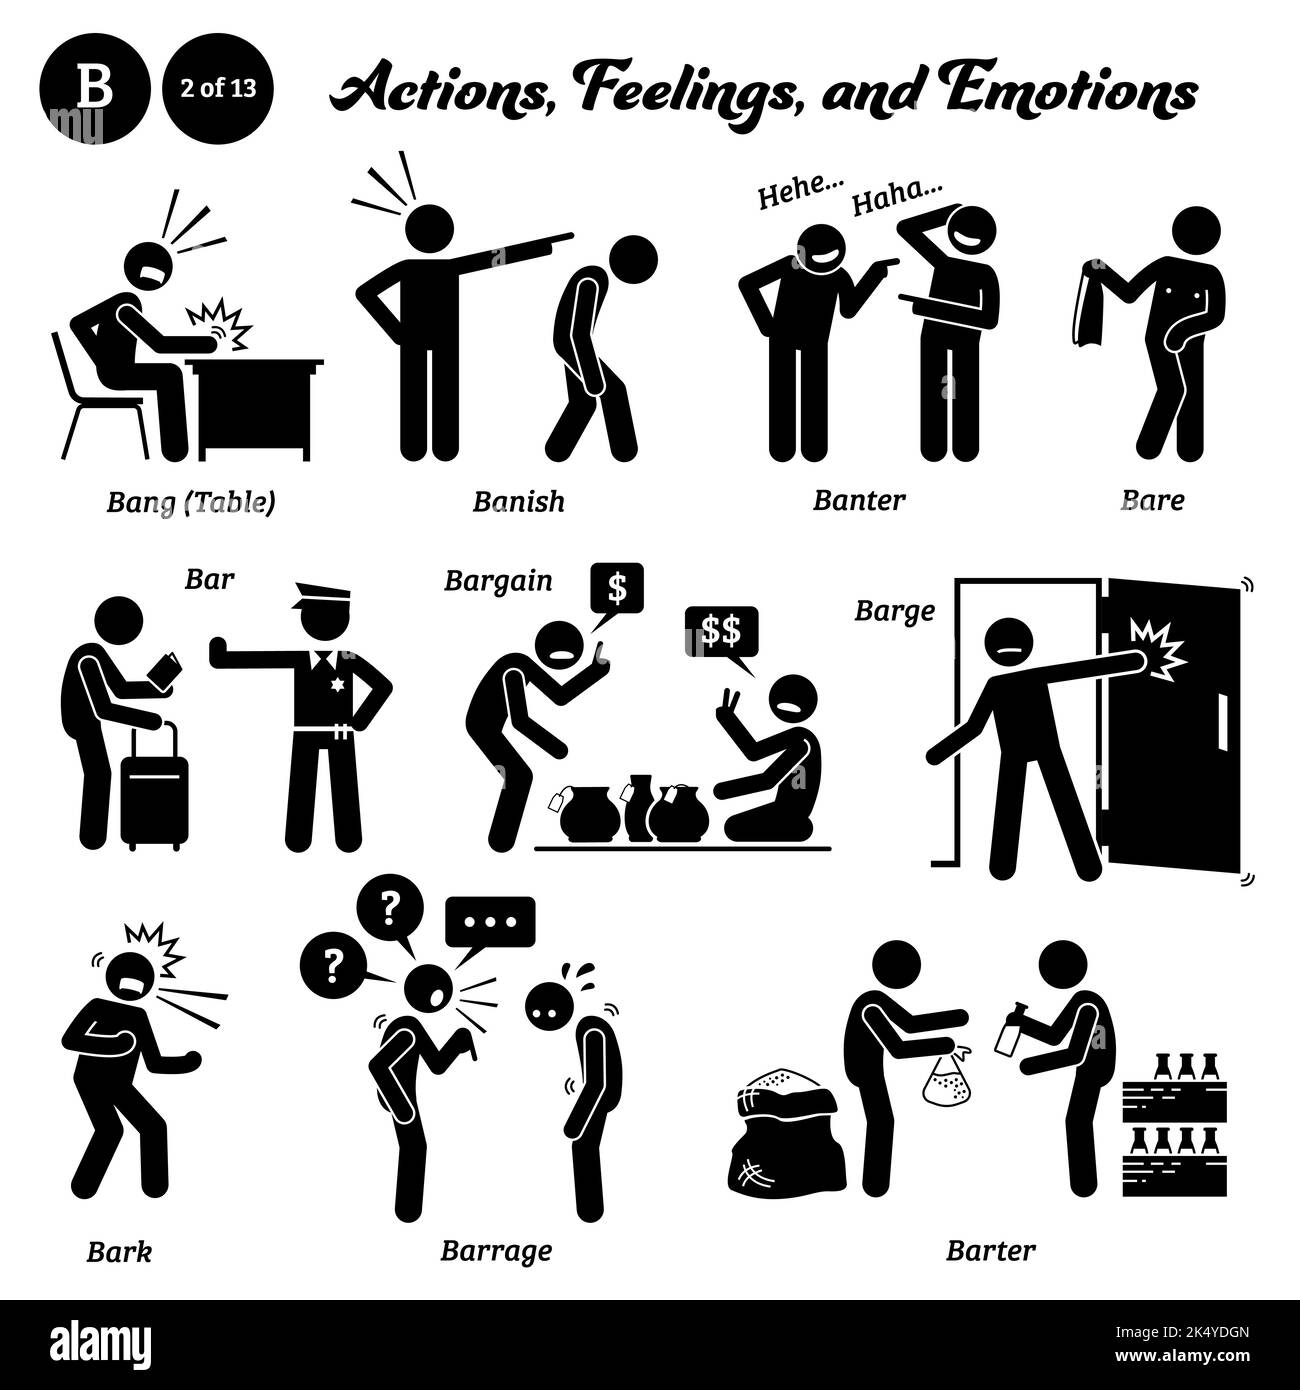 Stick figure human people man action, feelings, and emotions icons starting with alphabet B. Bang table, banish, banter, bare, bar, bargain, barge, ba Stock Vector